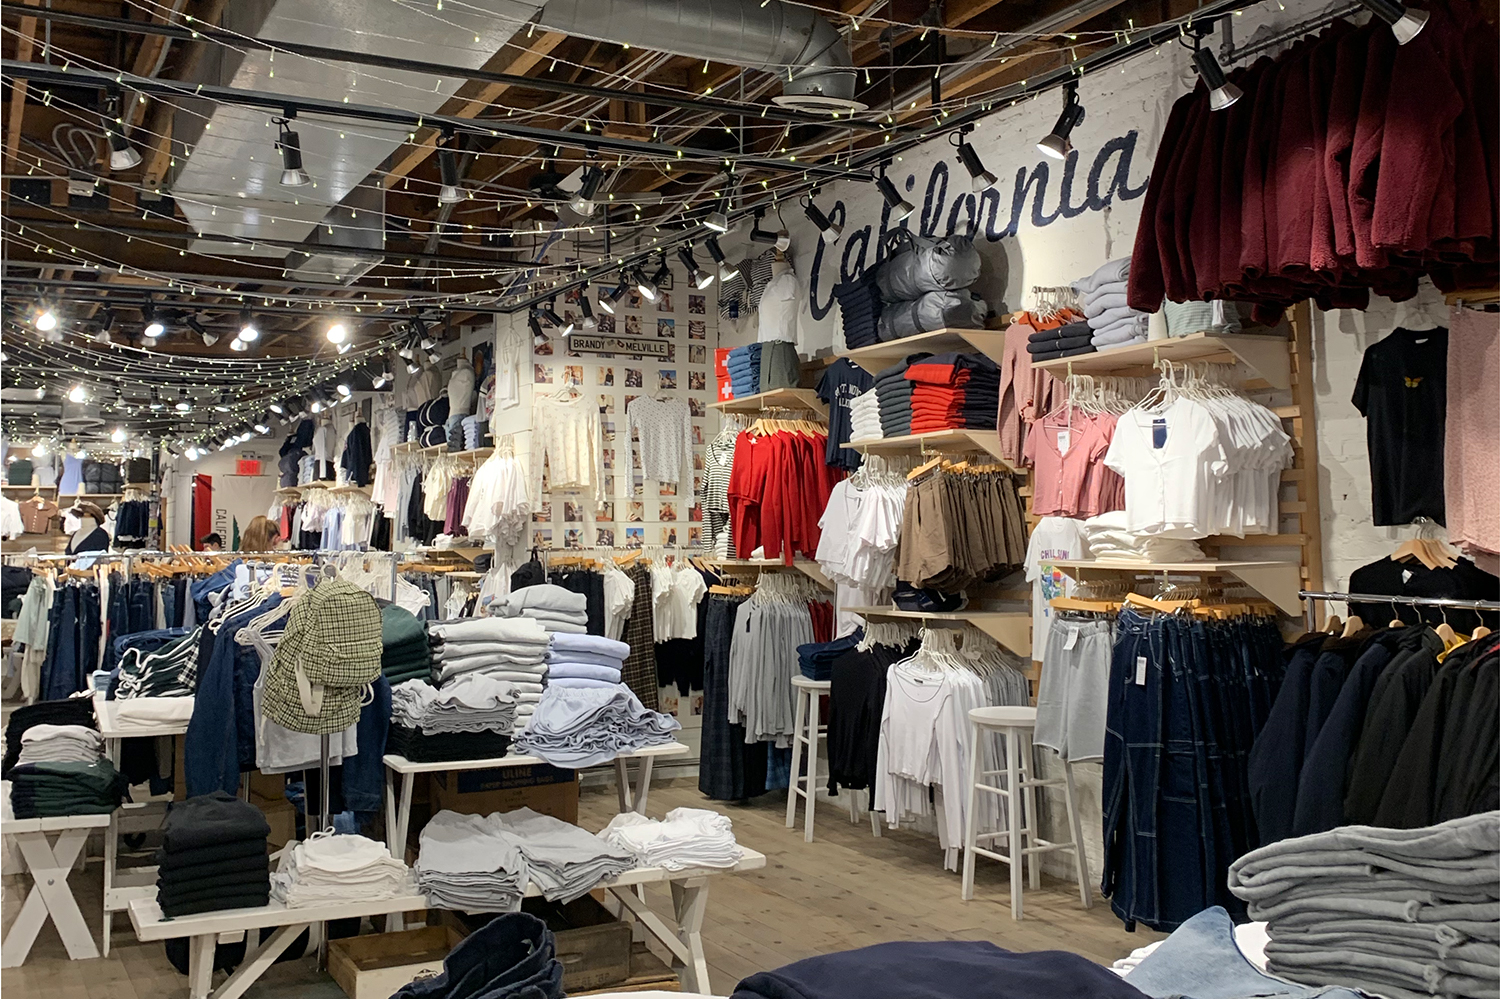 Brandy Melville - Brandy Melville updated their cover photo.